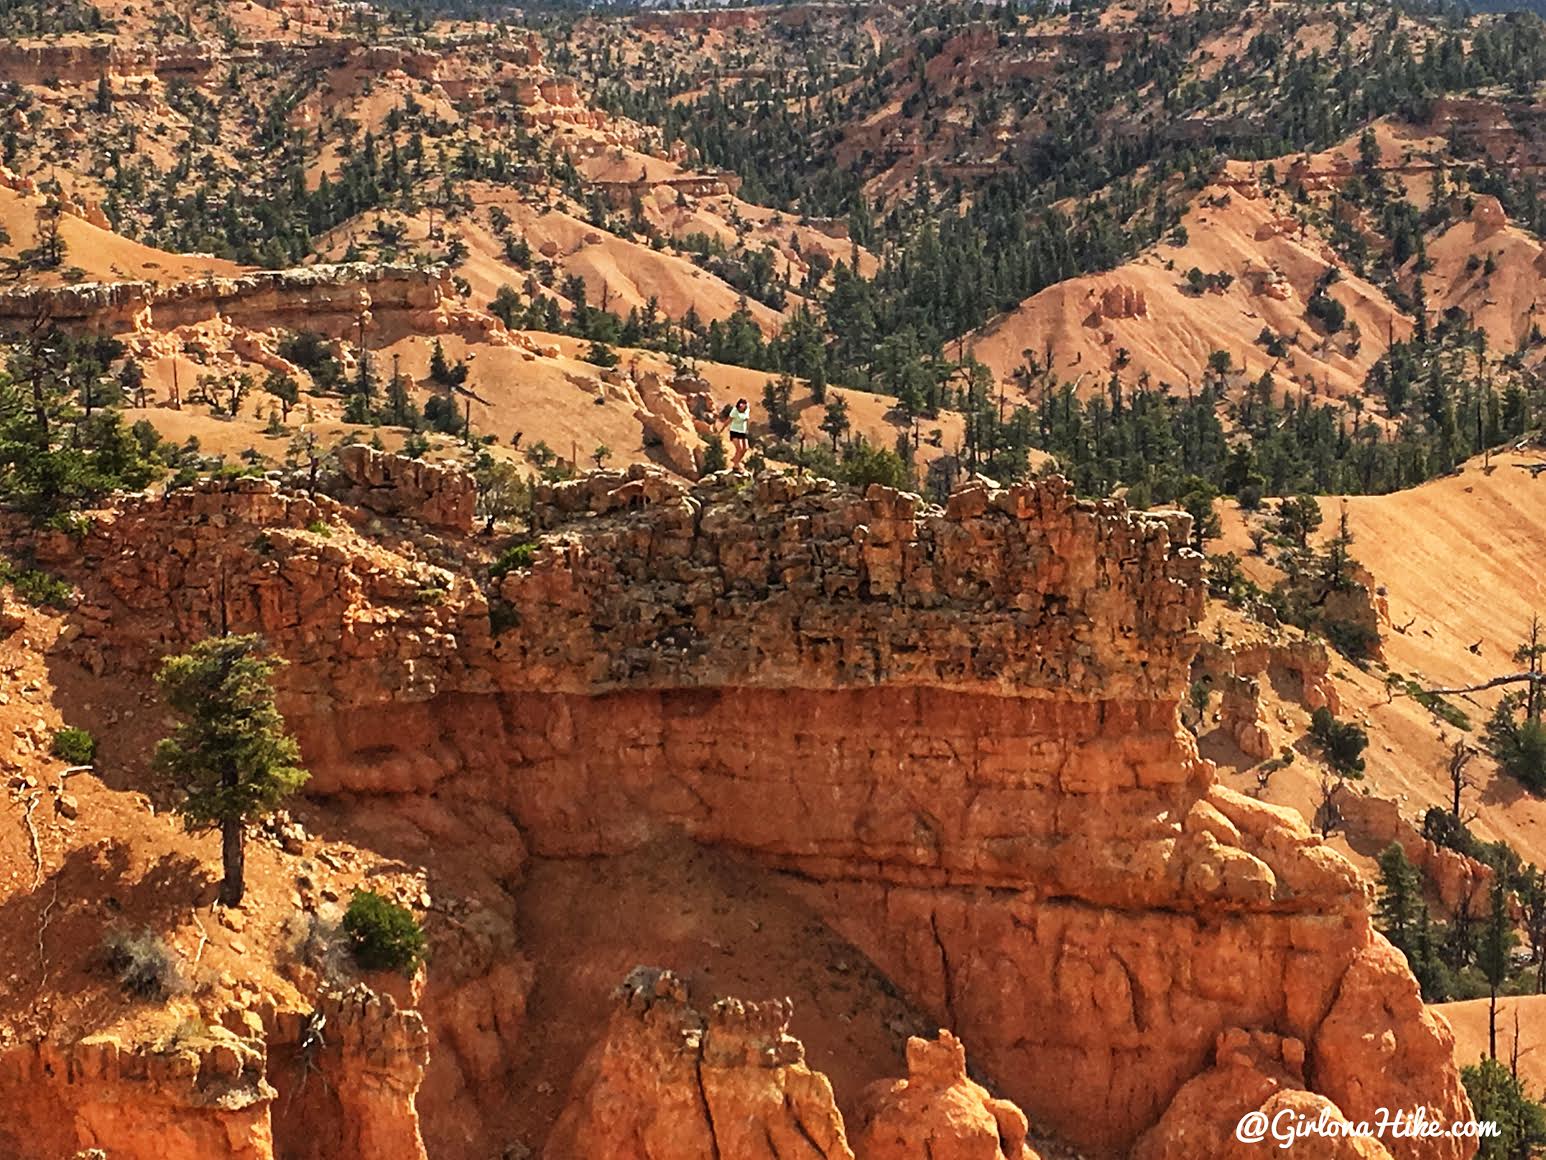 Hiking the Butch Cassidy Trail, Red Canyon near Bryce Canyon National Park